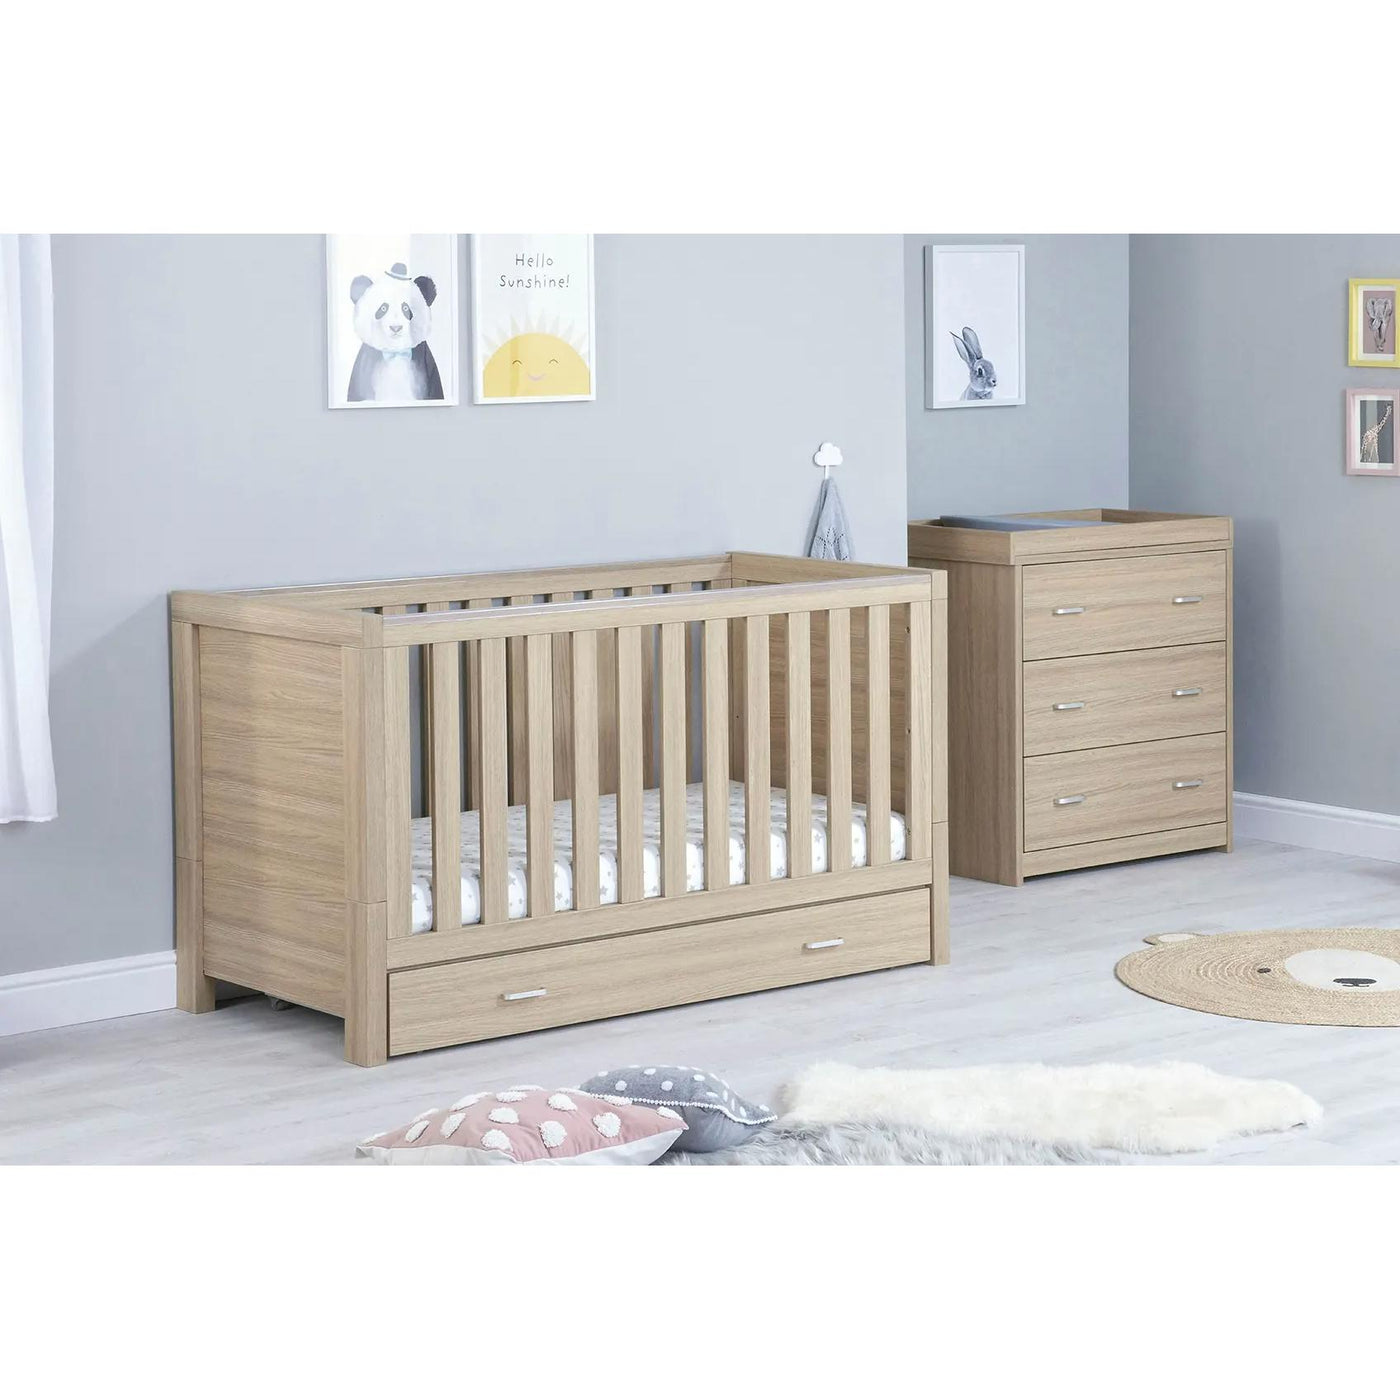 Luno 2 Piece Room Set with Drawer - Oak